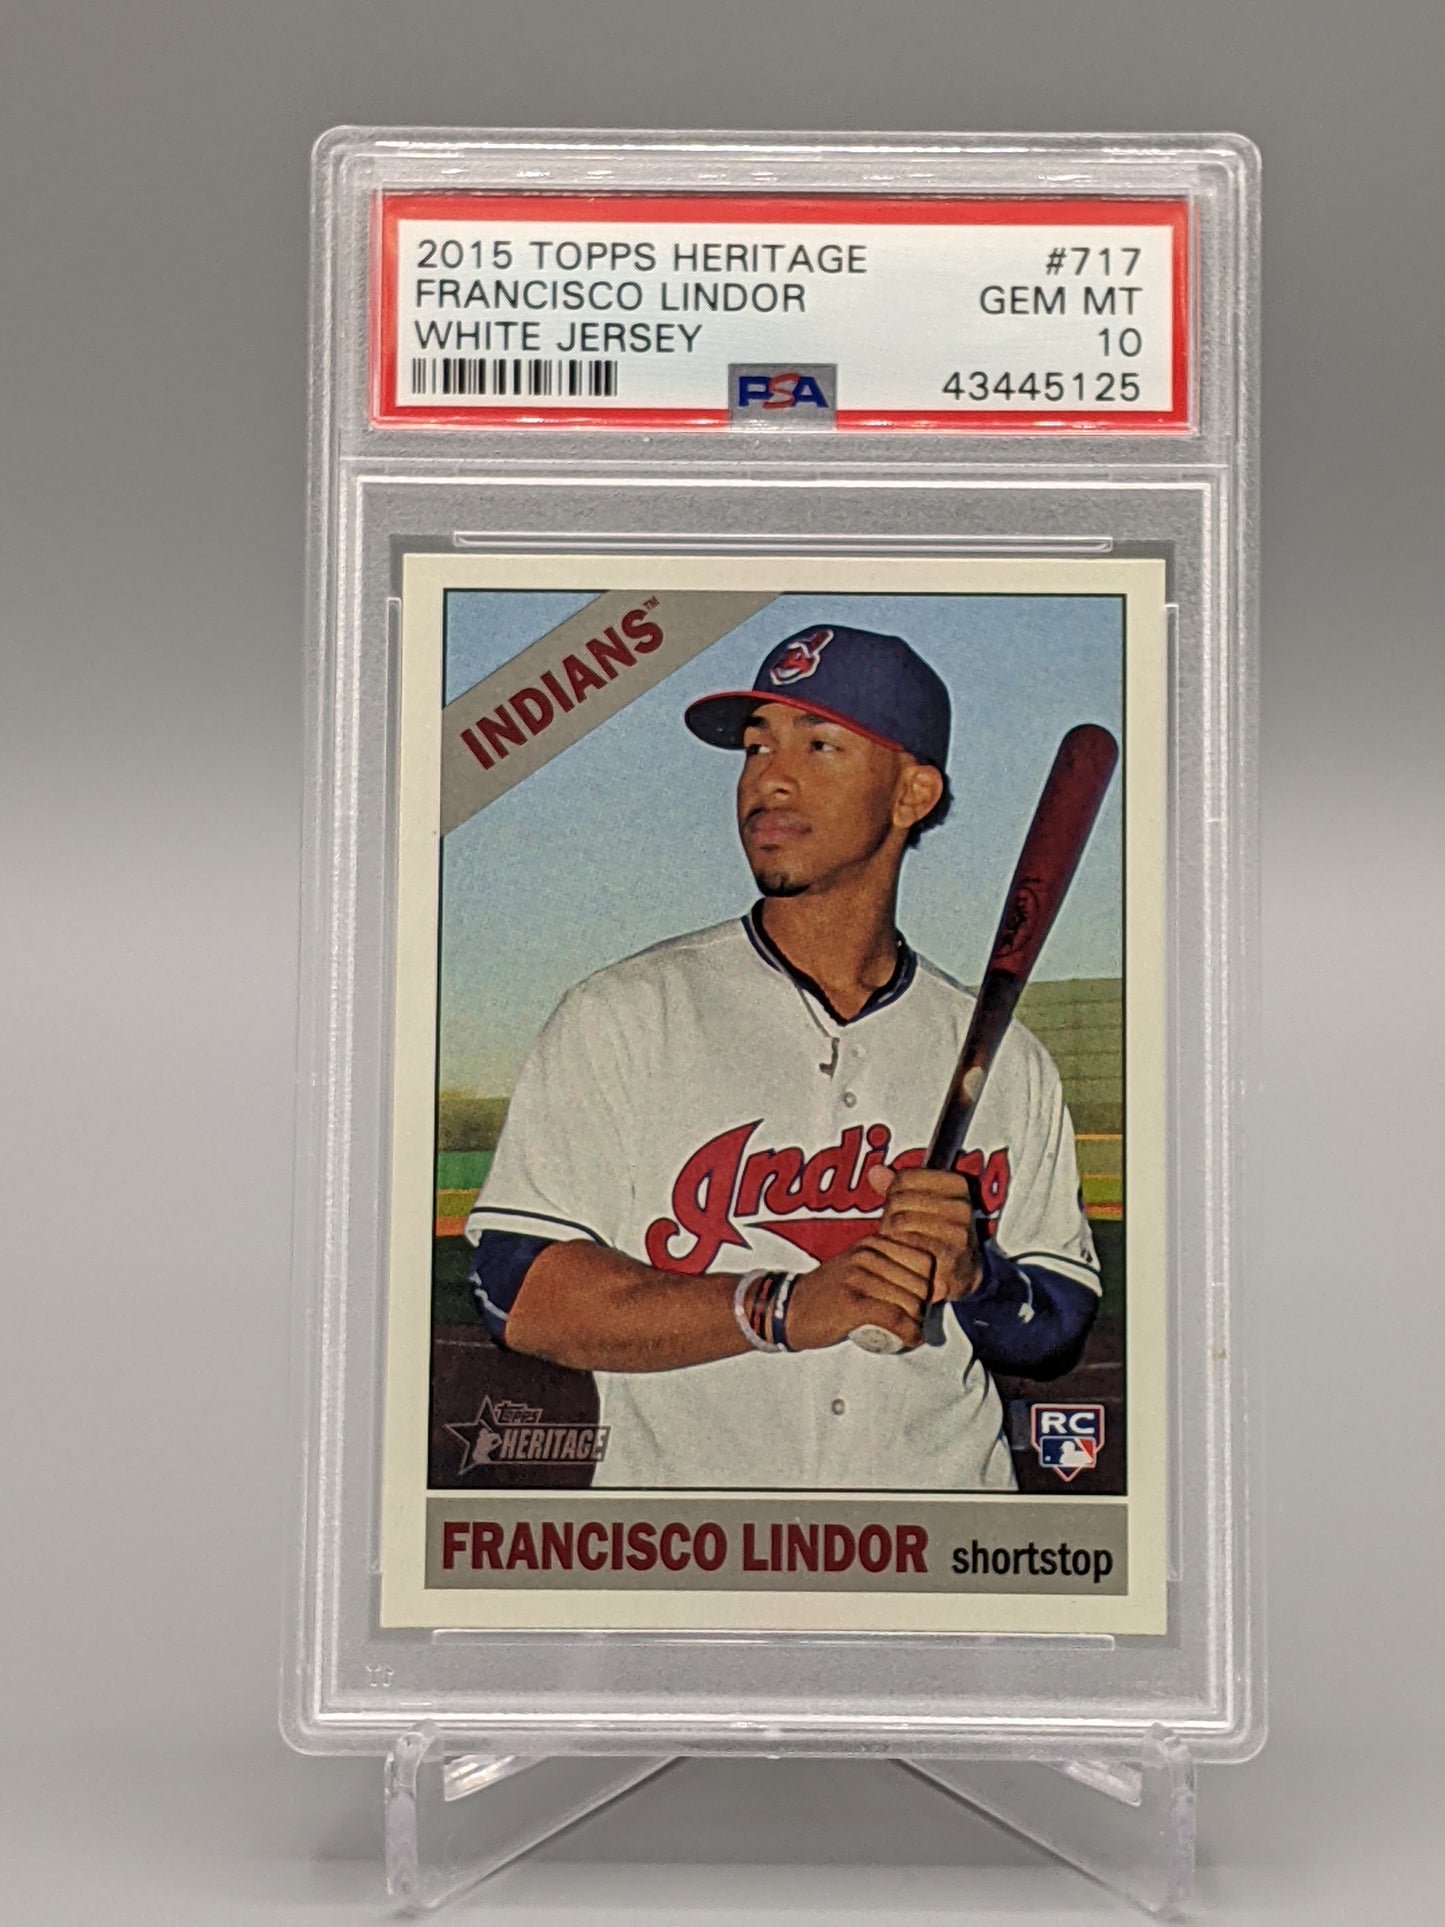 2015 Topps Heritage #717 Francisco Lindor RC White Jersey PSA 10 Indians